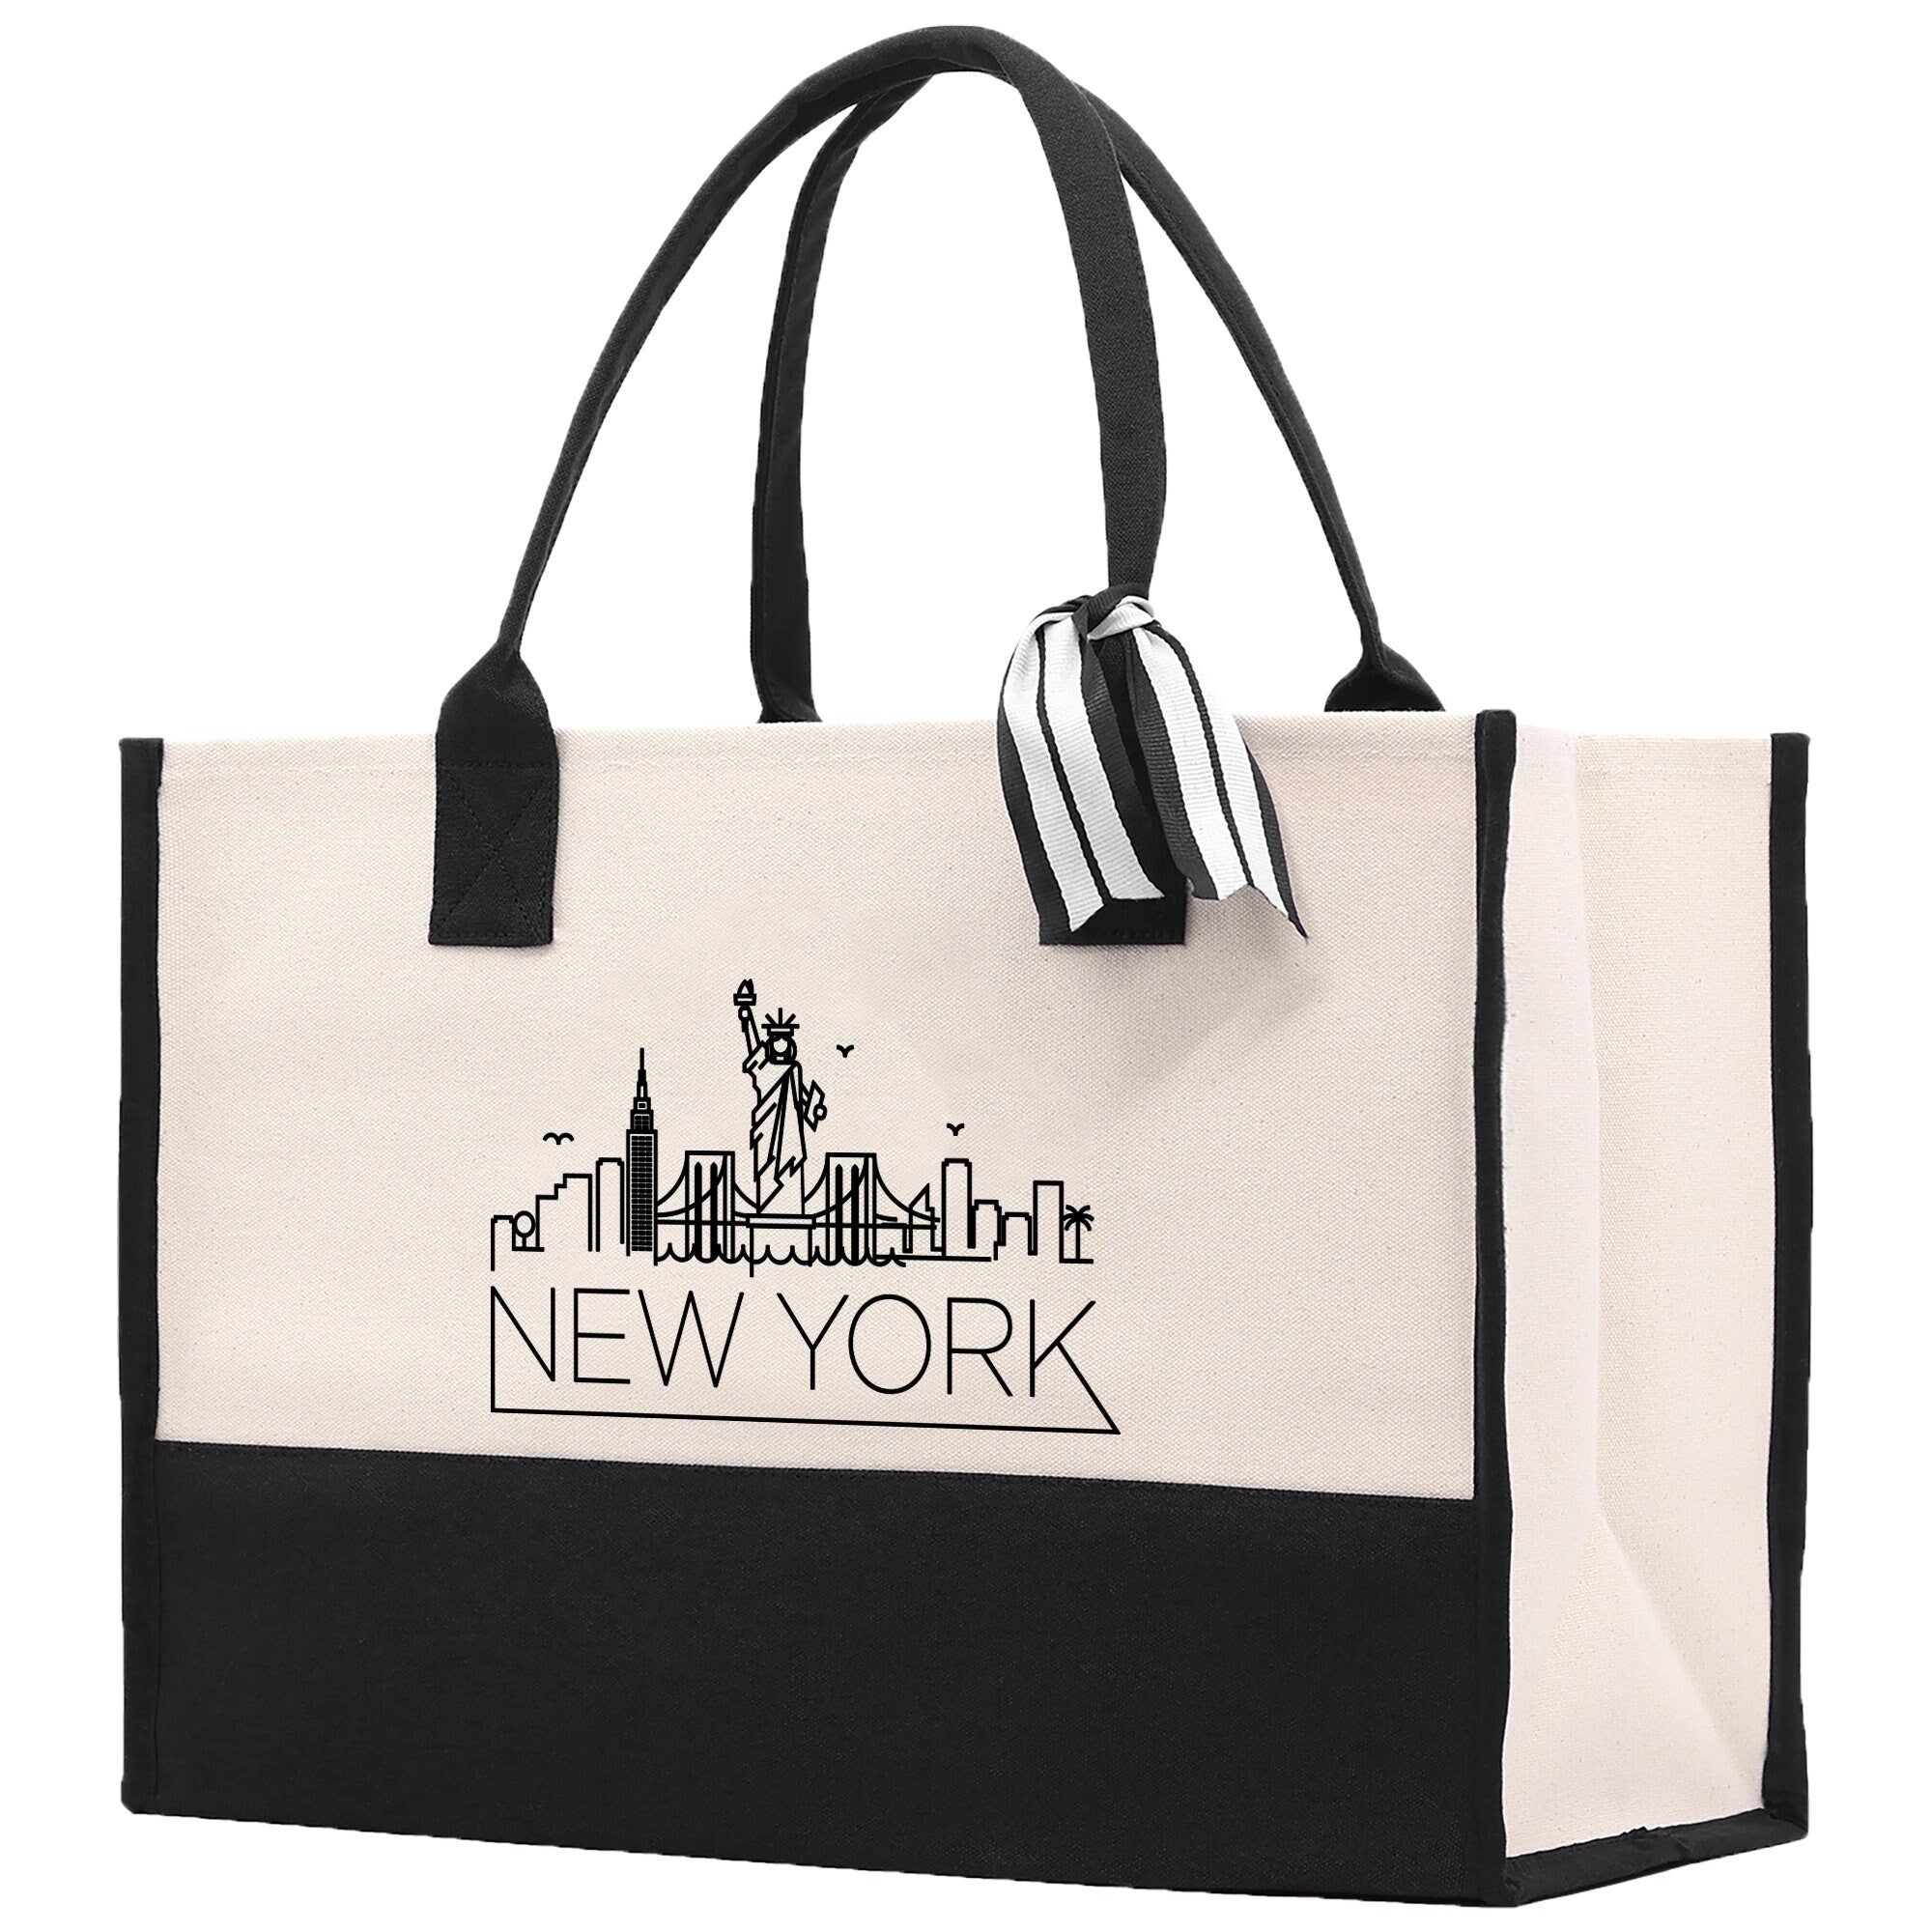 New York Cotton Canvas Tote Bag NY Travel Vacation Tote Employee and Client Gift Wedding Favor Birthday Welcome Tote Bag Bridesmaid Gift